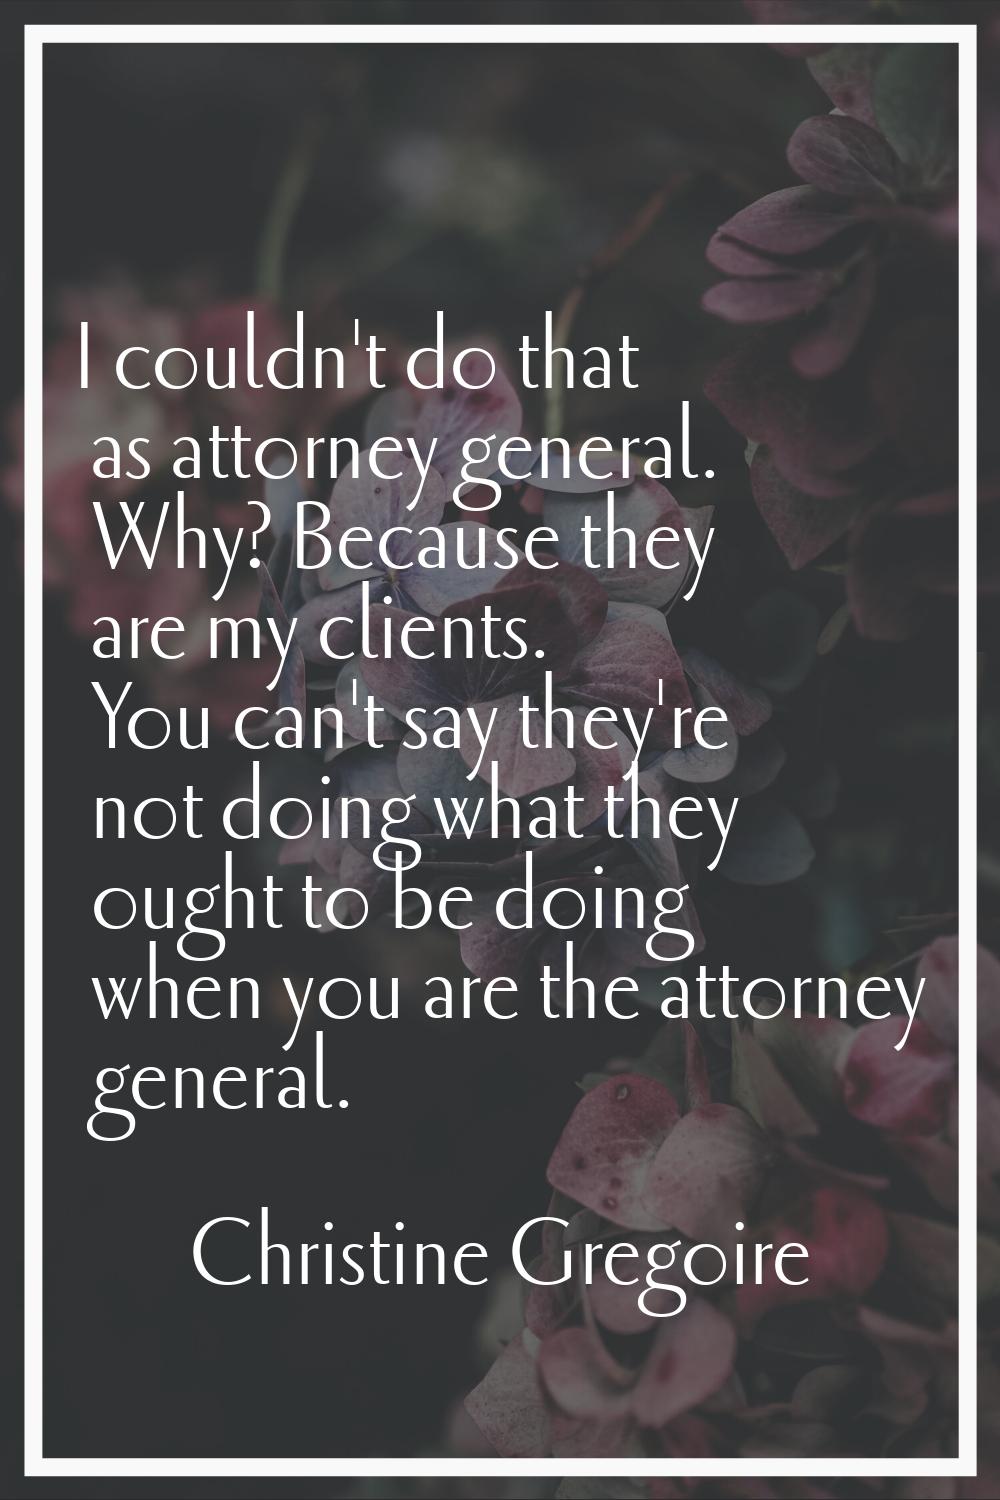 I couldn't do that as attorney general. Why? Because they are my clients. You can't say they're not